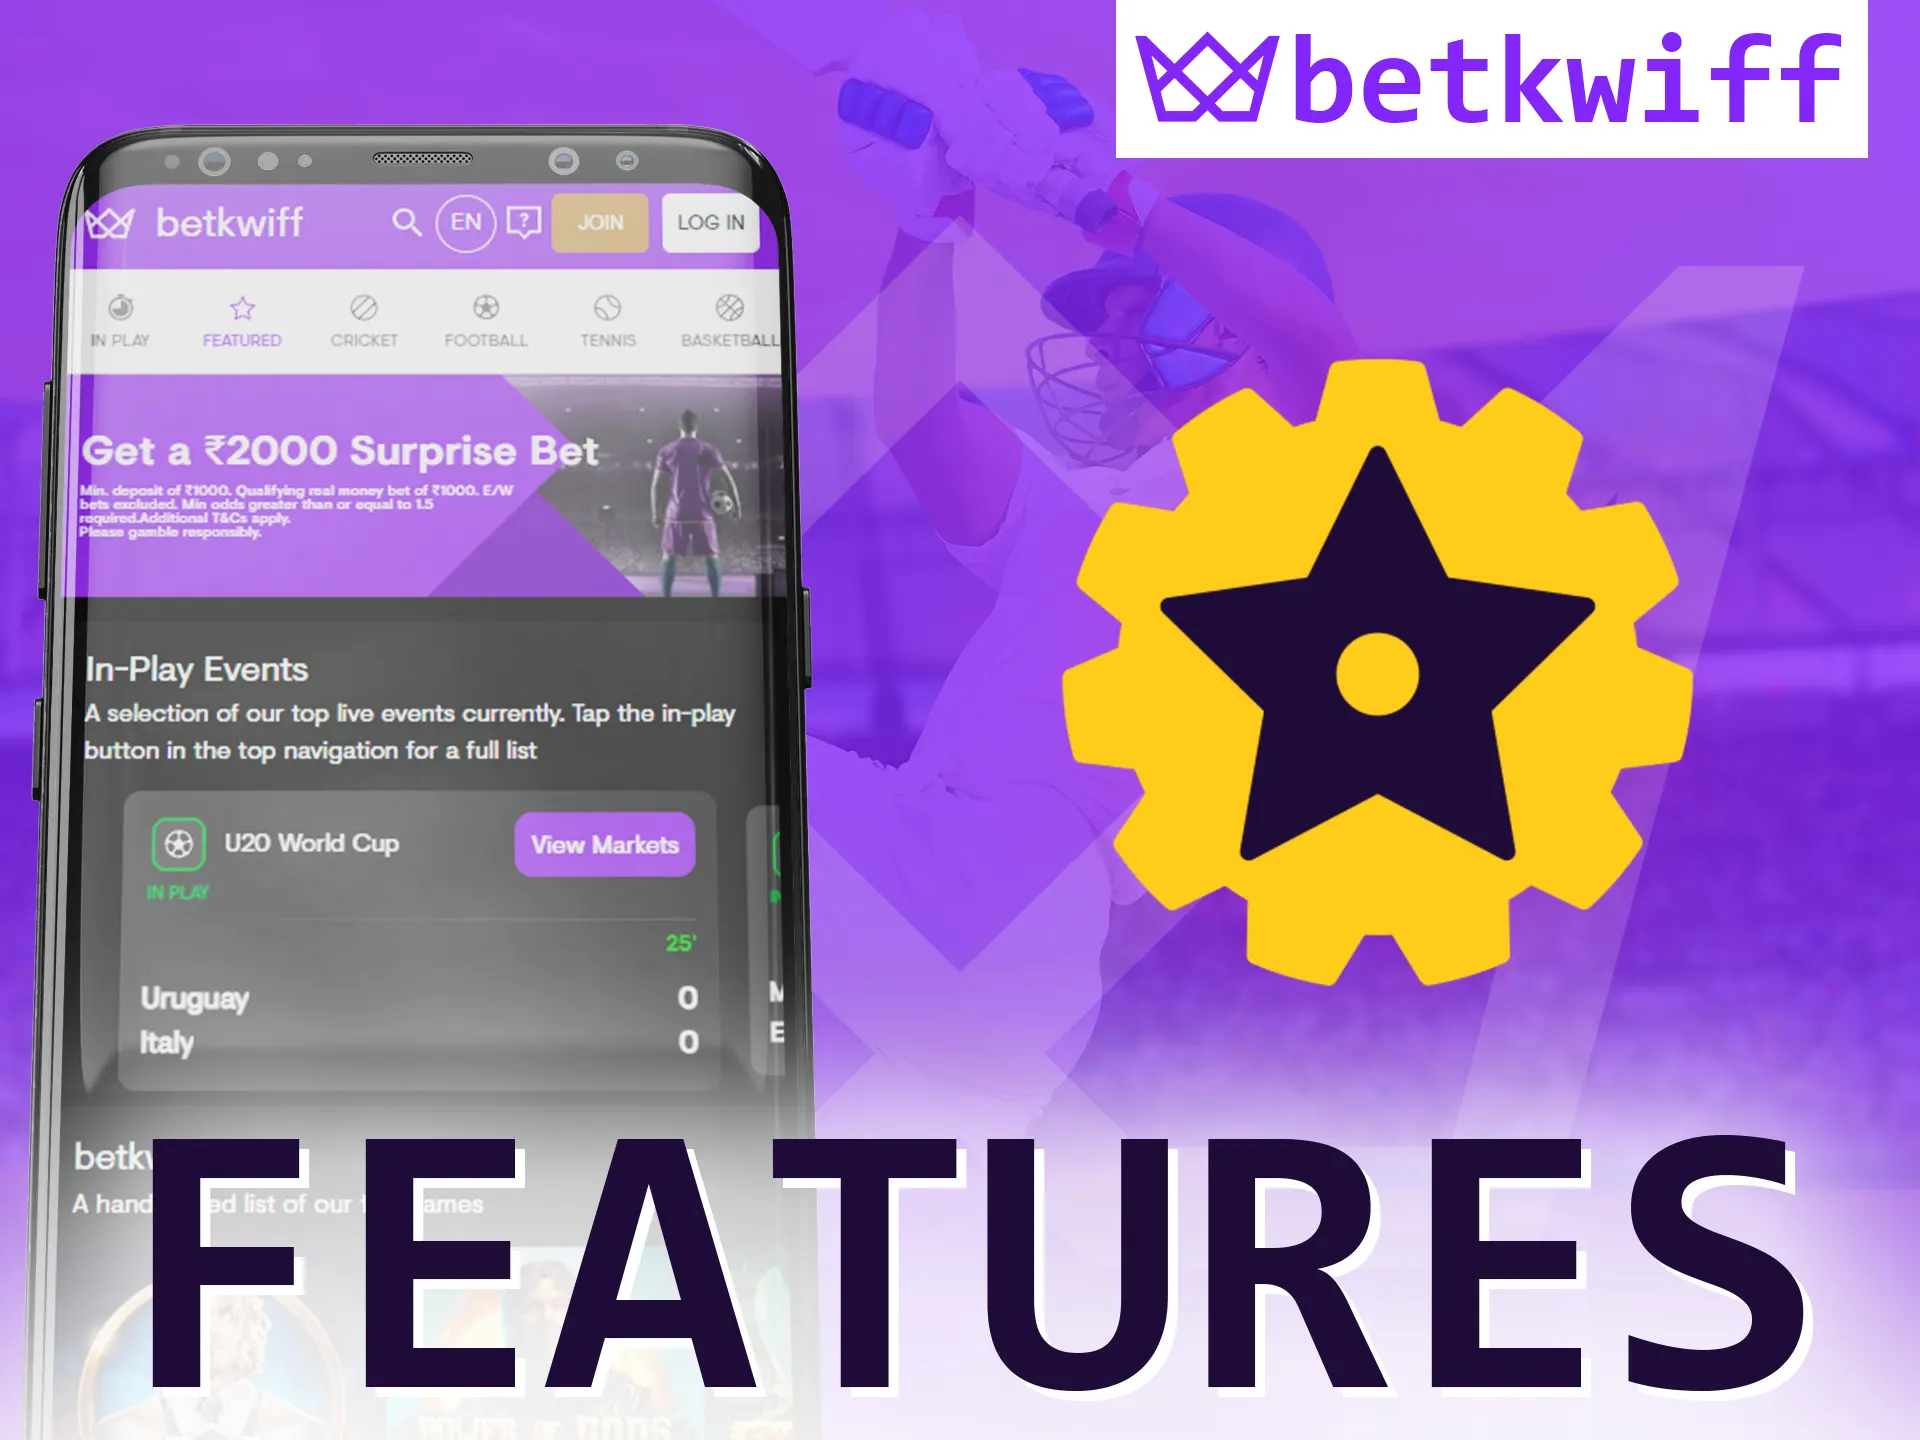 The Betkwiff app has many handy features.